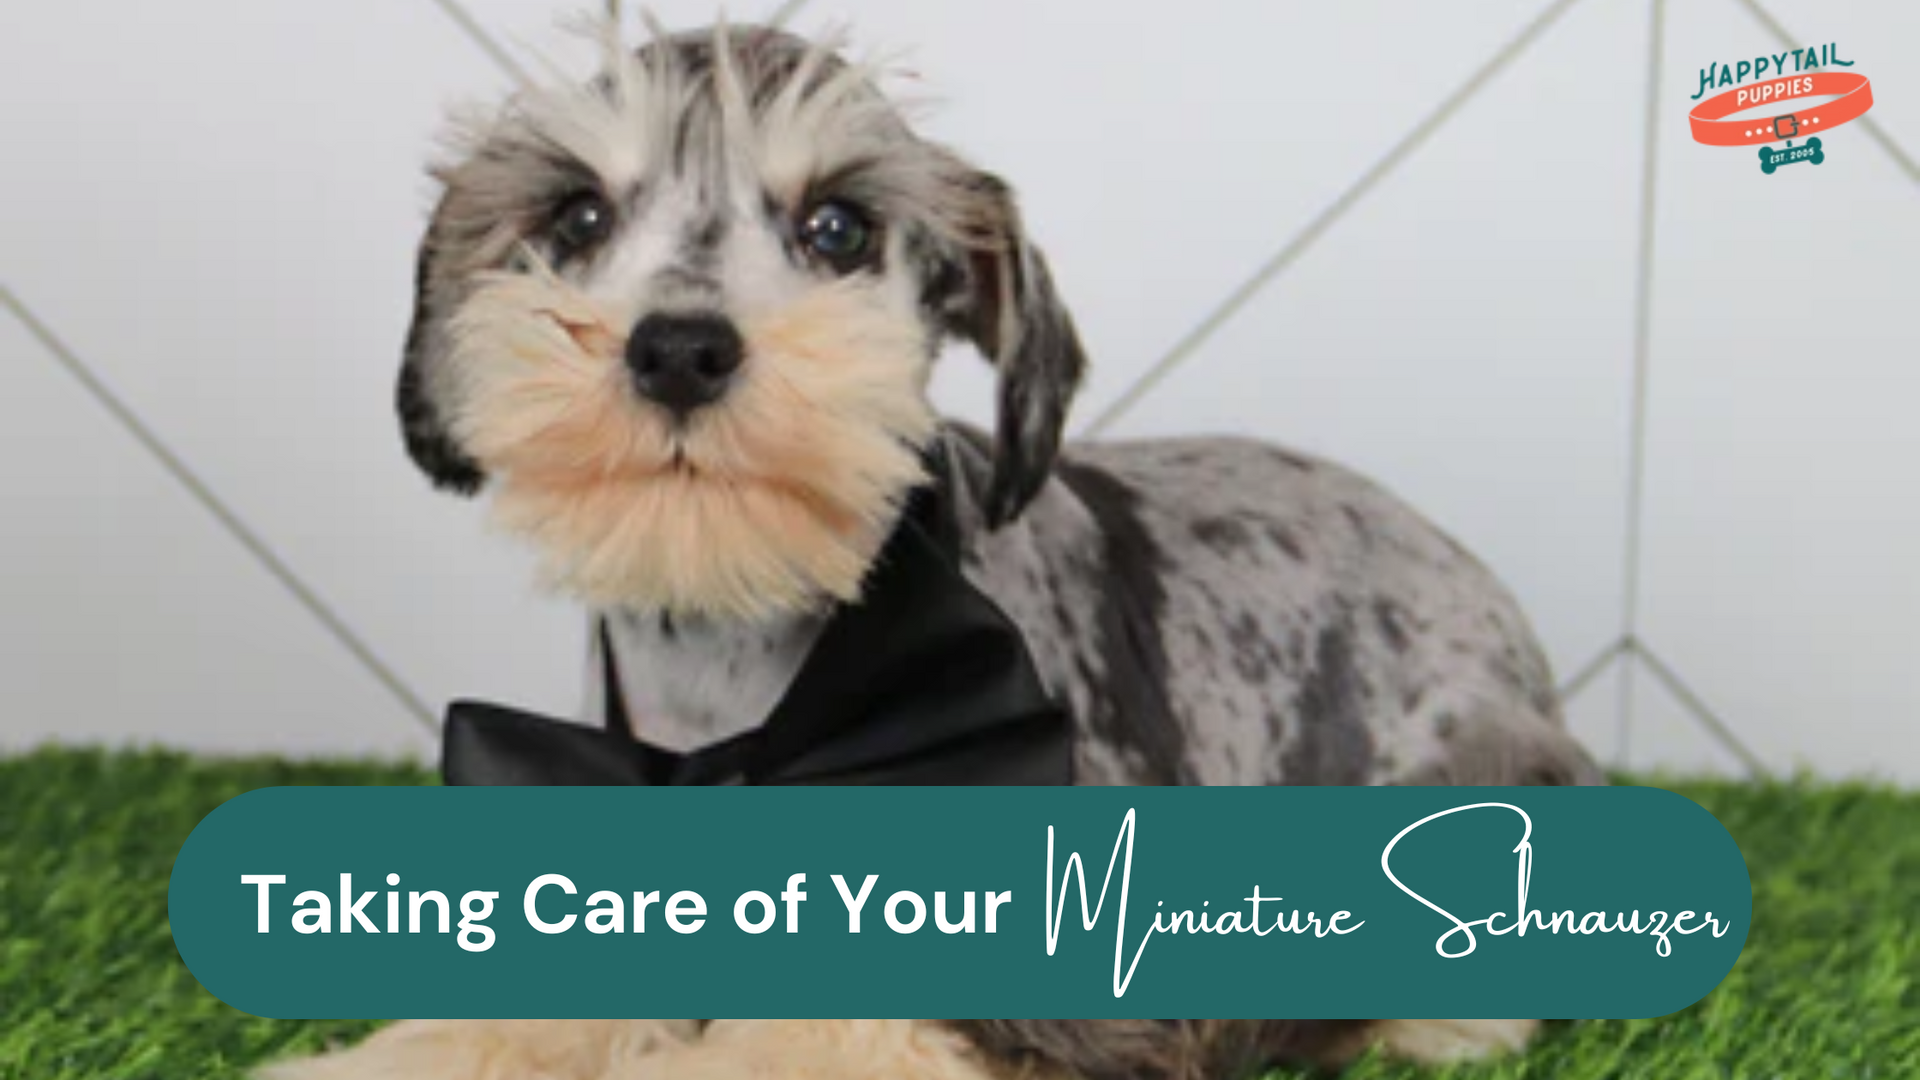 Taking care of your miniature schnauzer